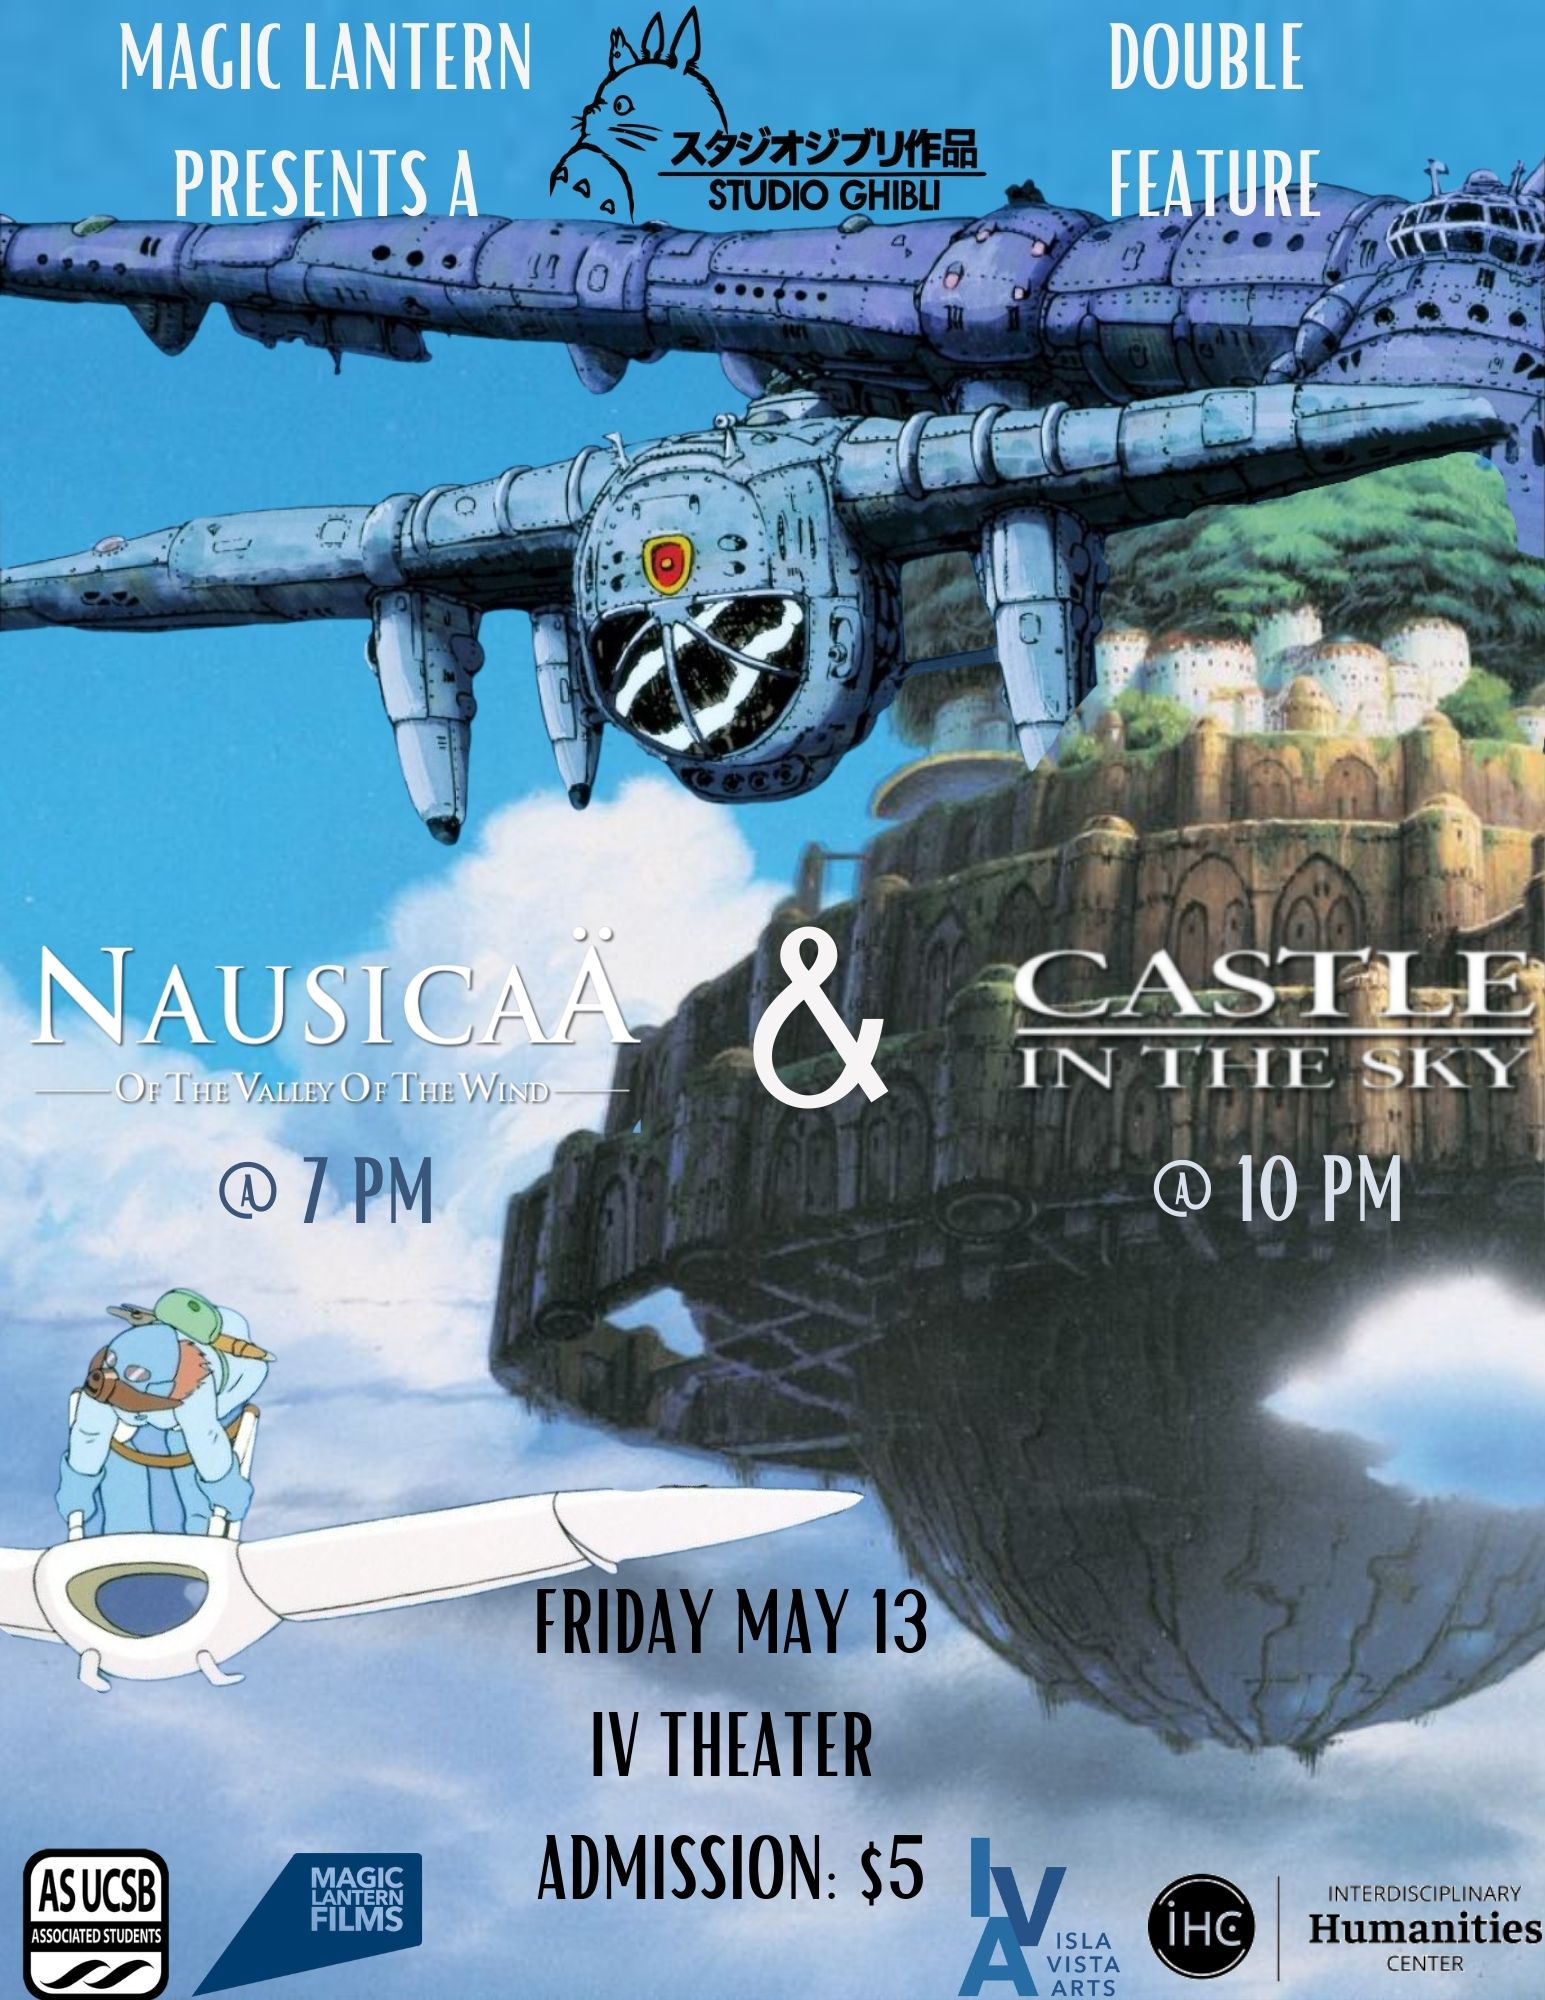 NAUSICAA OF THE VALLEY OF THE WIND & THE CASTLE IN THE SKY